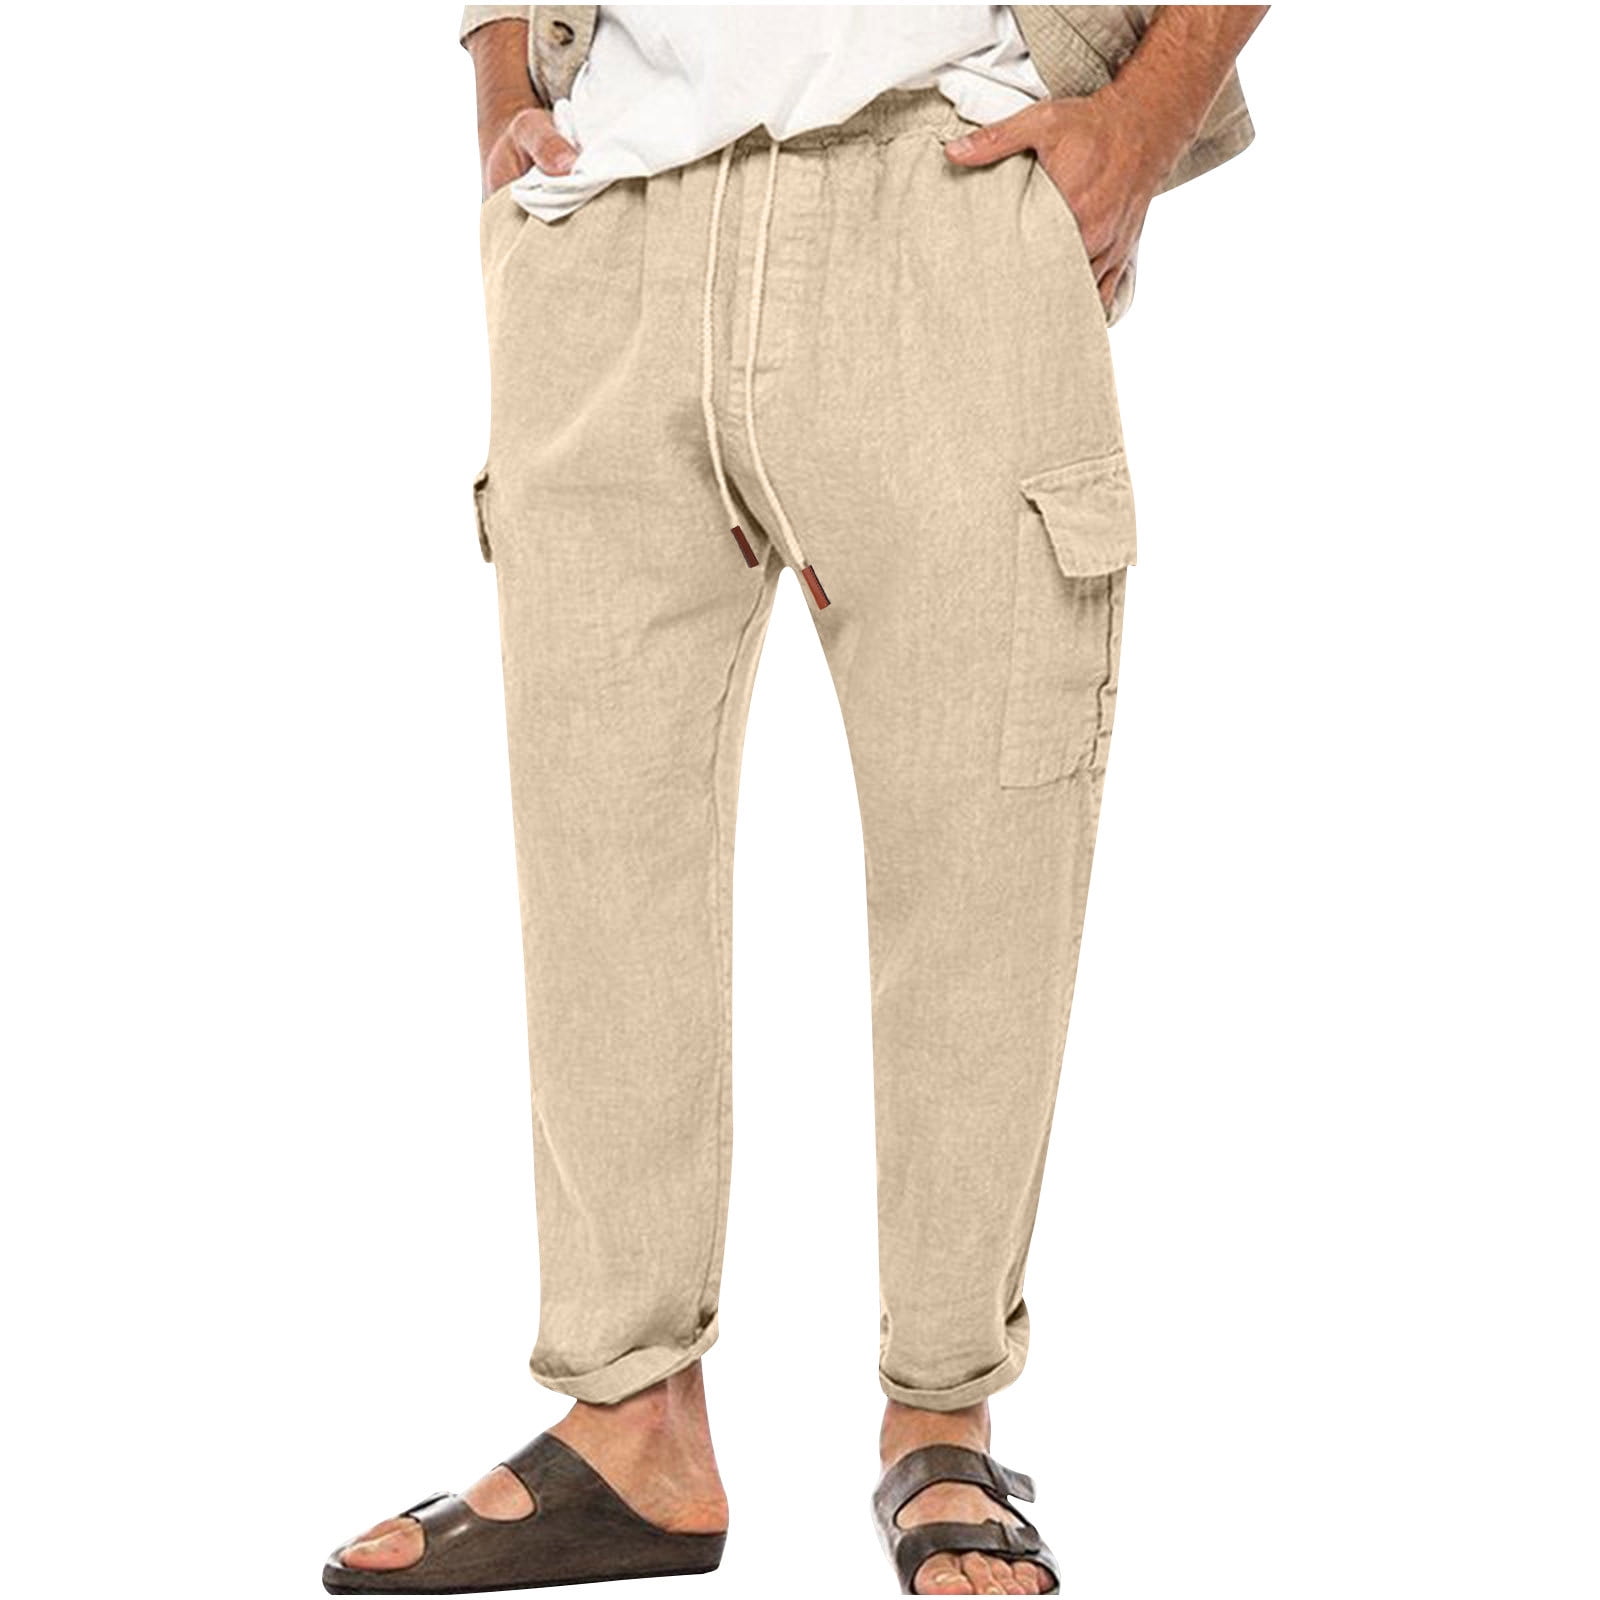 Winter Cotton Linen Booty Pants for Men Plus Size Drawstring Tapered  Trousers with Flap Pockets Solid Color Slim-Fit Ankle Length Pant -  Walmart.com